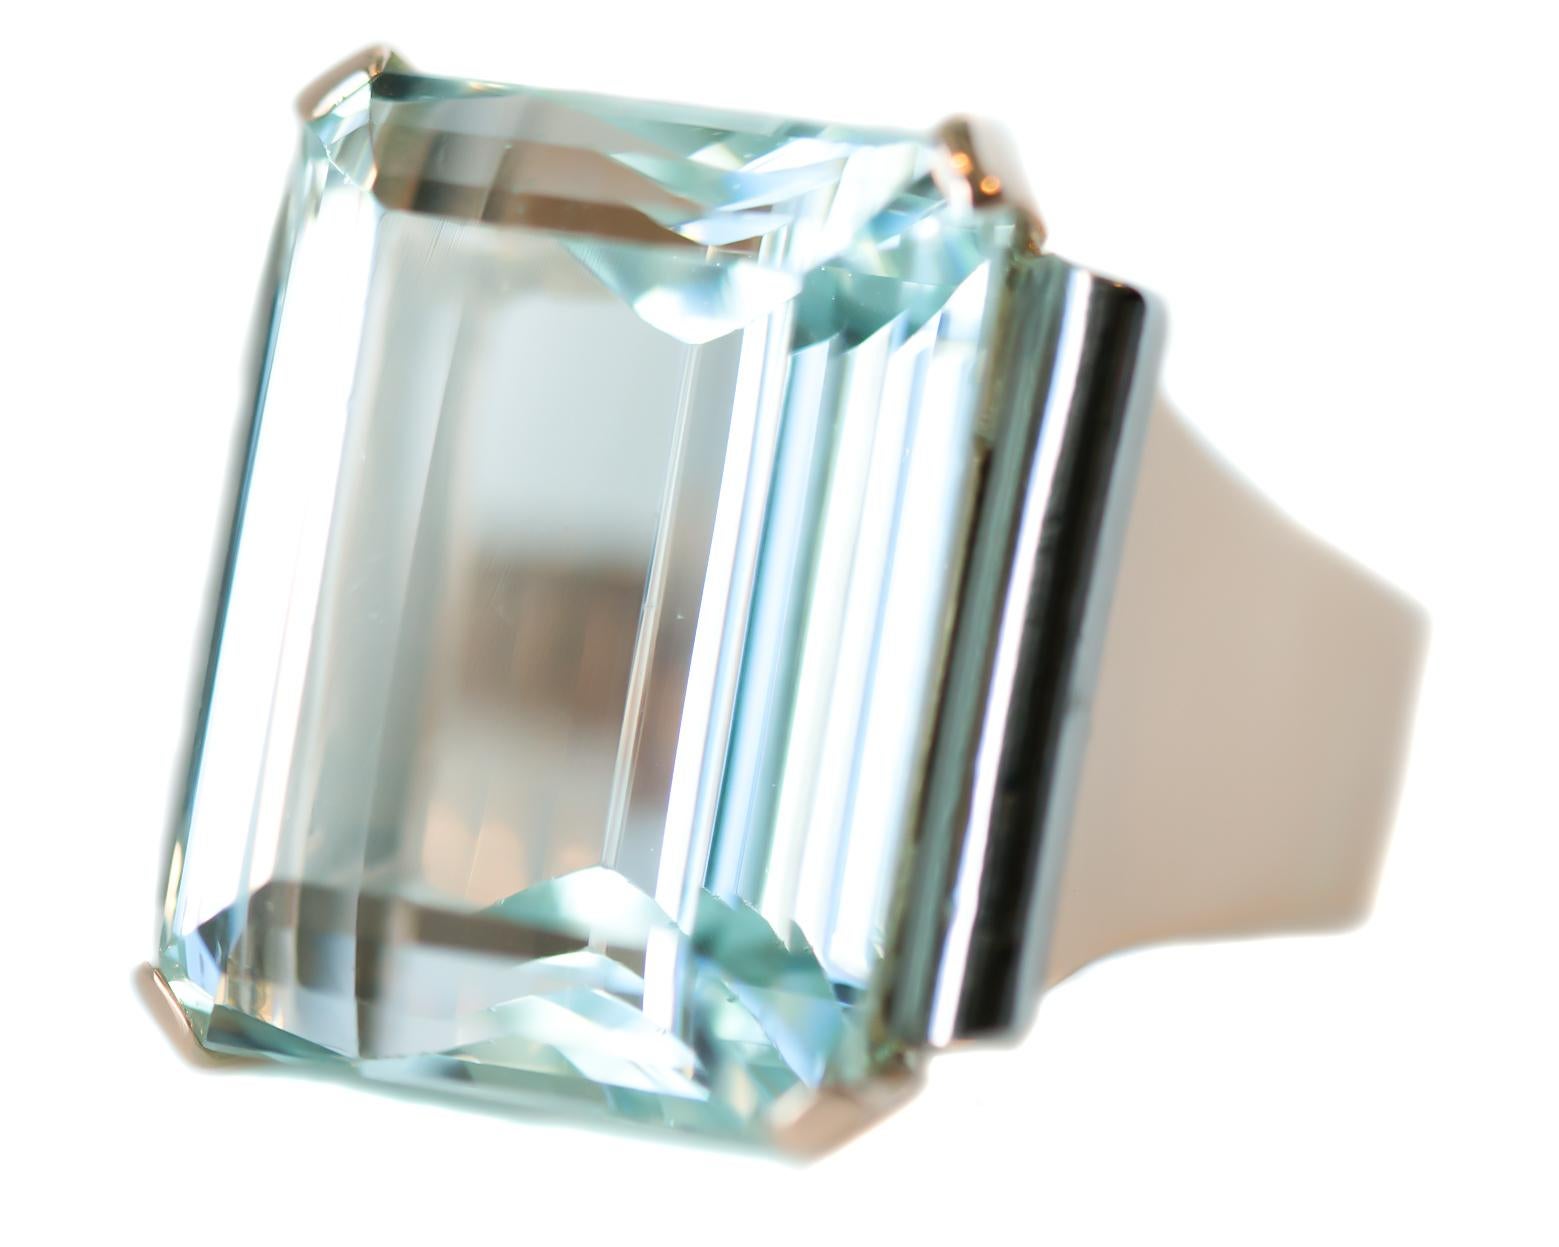 1950s Retro 18 Carat Aquamarine Ring -  14 Karat Rose Gold, Aquamarine

Features: 
18 Carat Emerald Step Cut Aquamarine 
14 Karat Rose Gold Setting
Rolled Scroll Style Setting Sides
Cathedral Setting
Open Cut Out Scroll Design Gallery
Clear, light